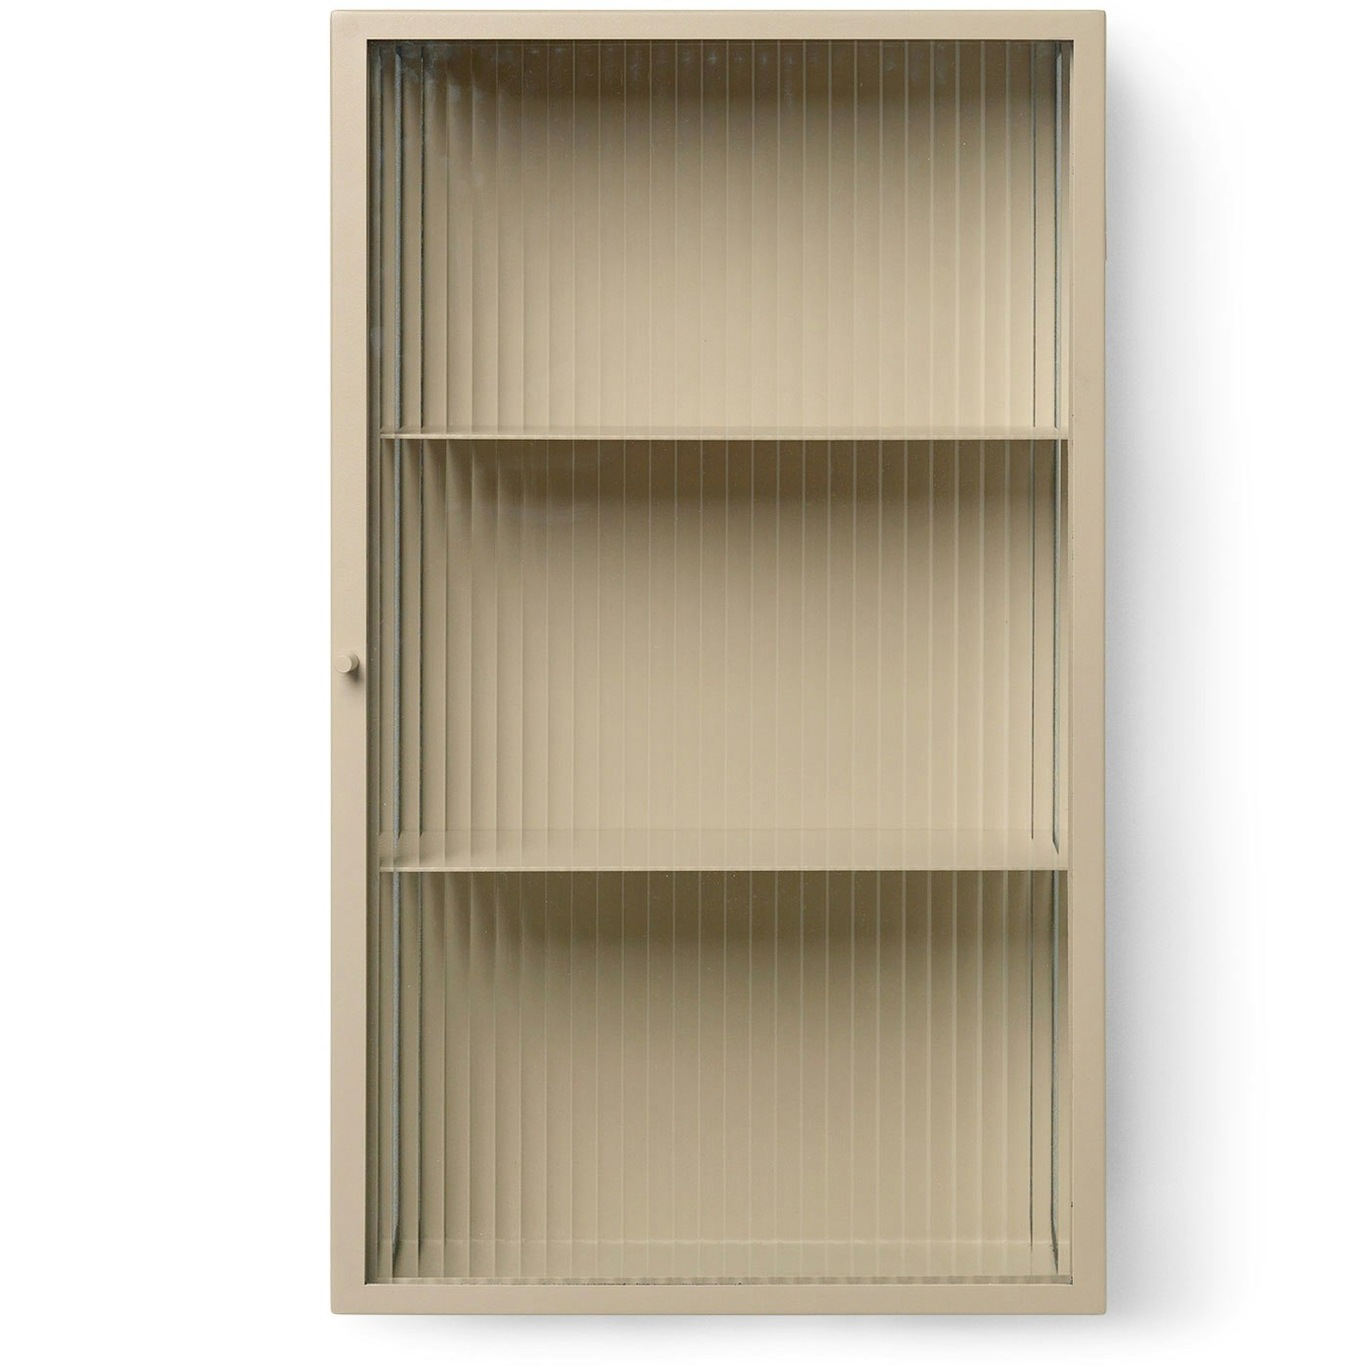 Haze Wall Cabinet - Reeded Glas - Cashme